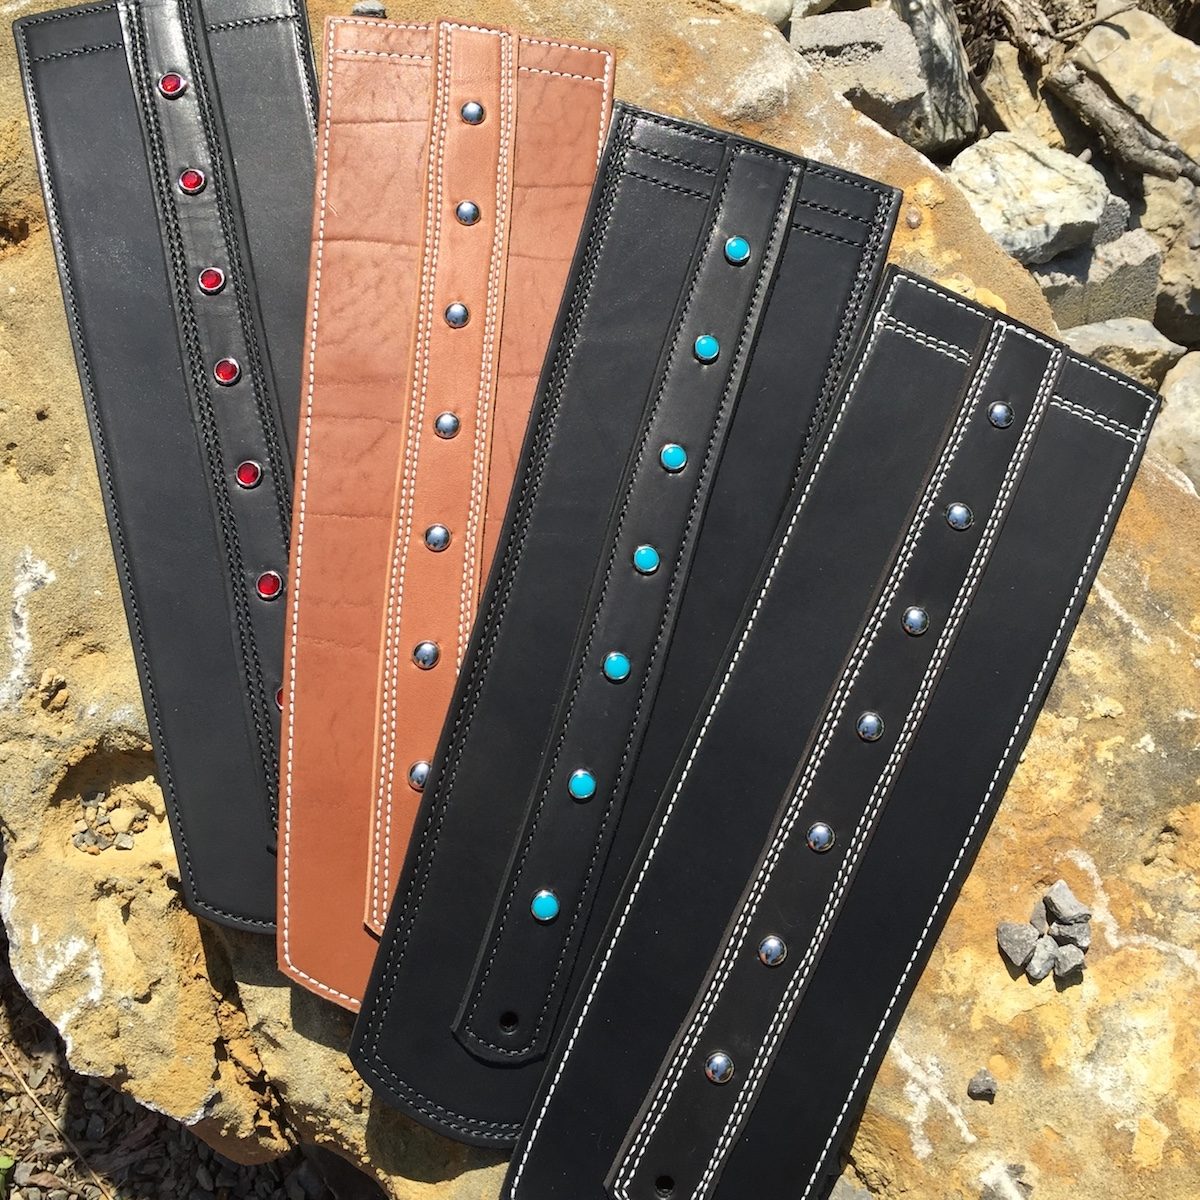 Indian Fender Bib with colored studs or crystals